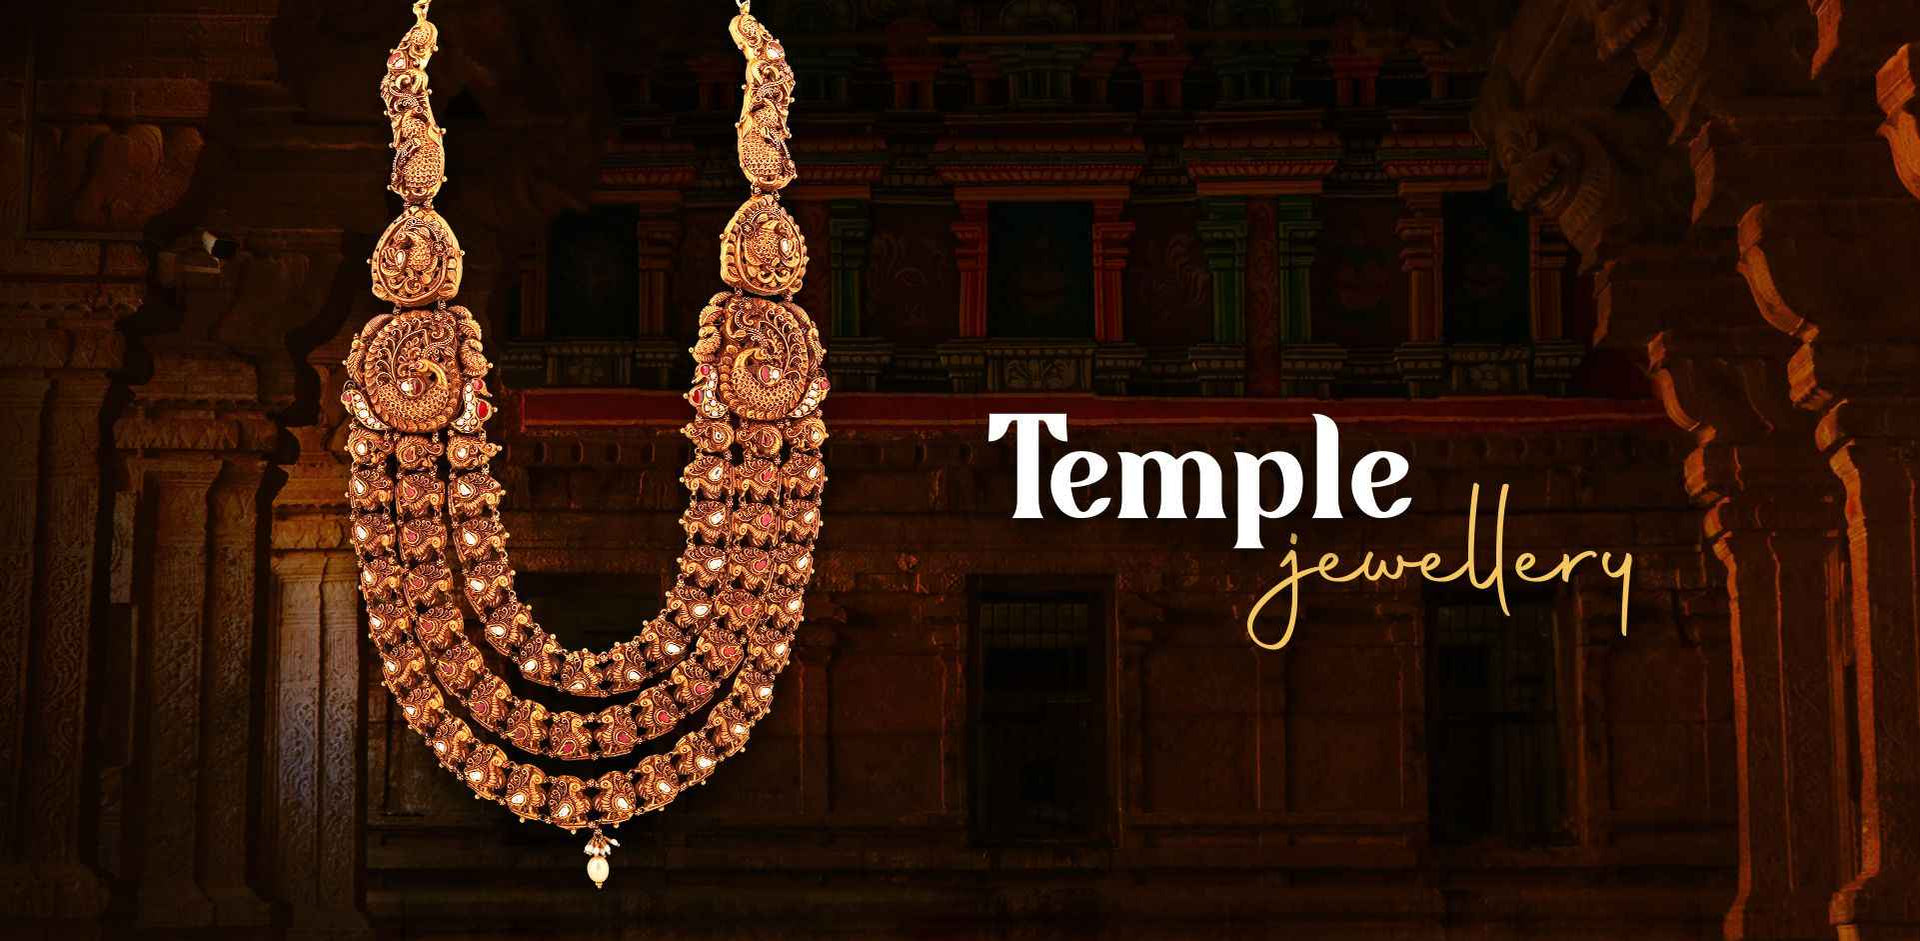 Temple Jewellery in chennai, Jewellery shops in chennai, Gold jewellery shops in chennai, Top Jewellers in chennai, Best Jewellers in chennai